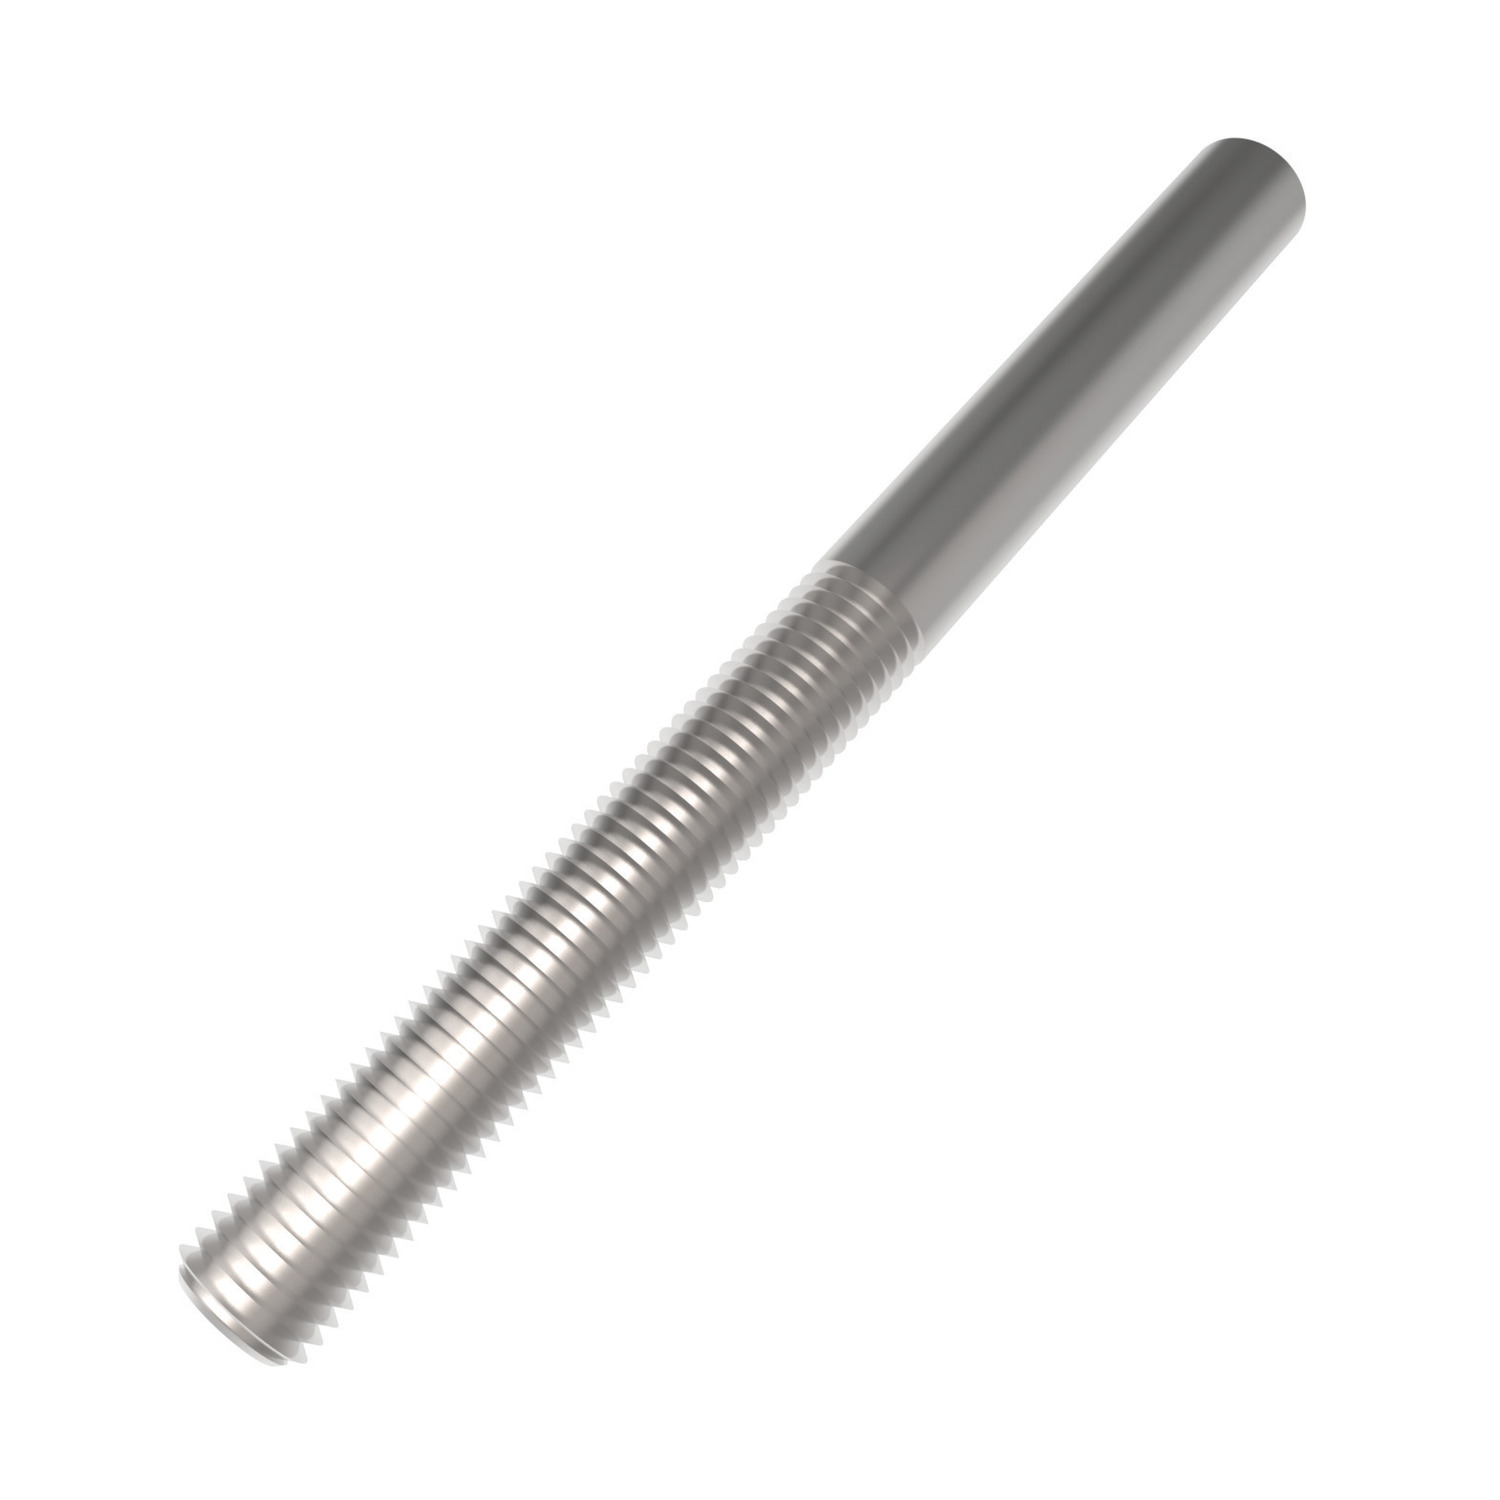 R3866.L030-ZP Welding Studs steel LH M30 Not to be used for lifting unless SWL marked.